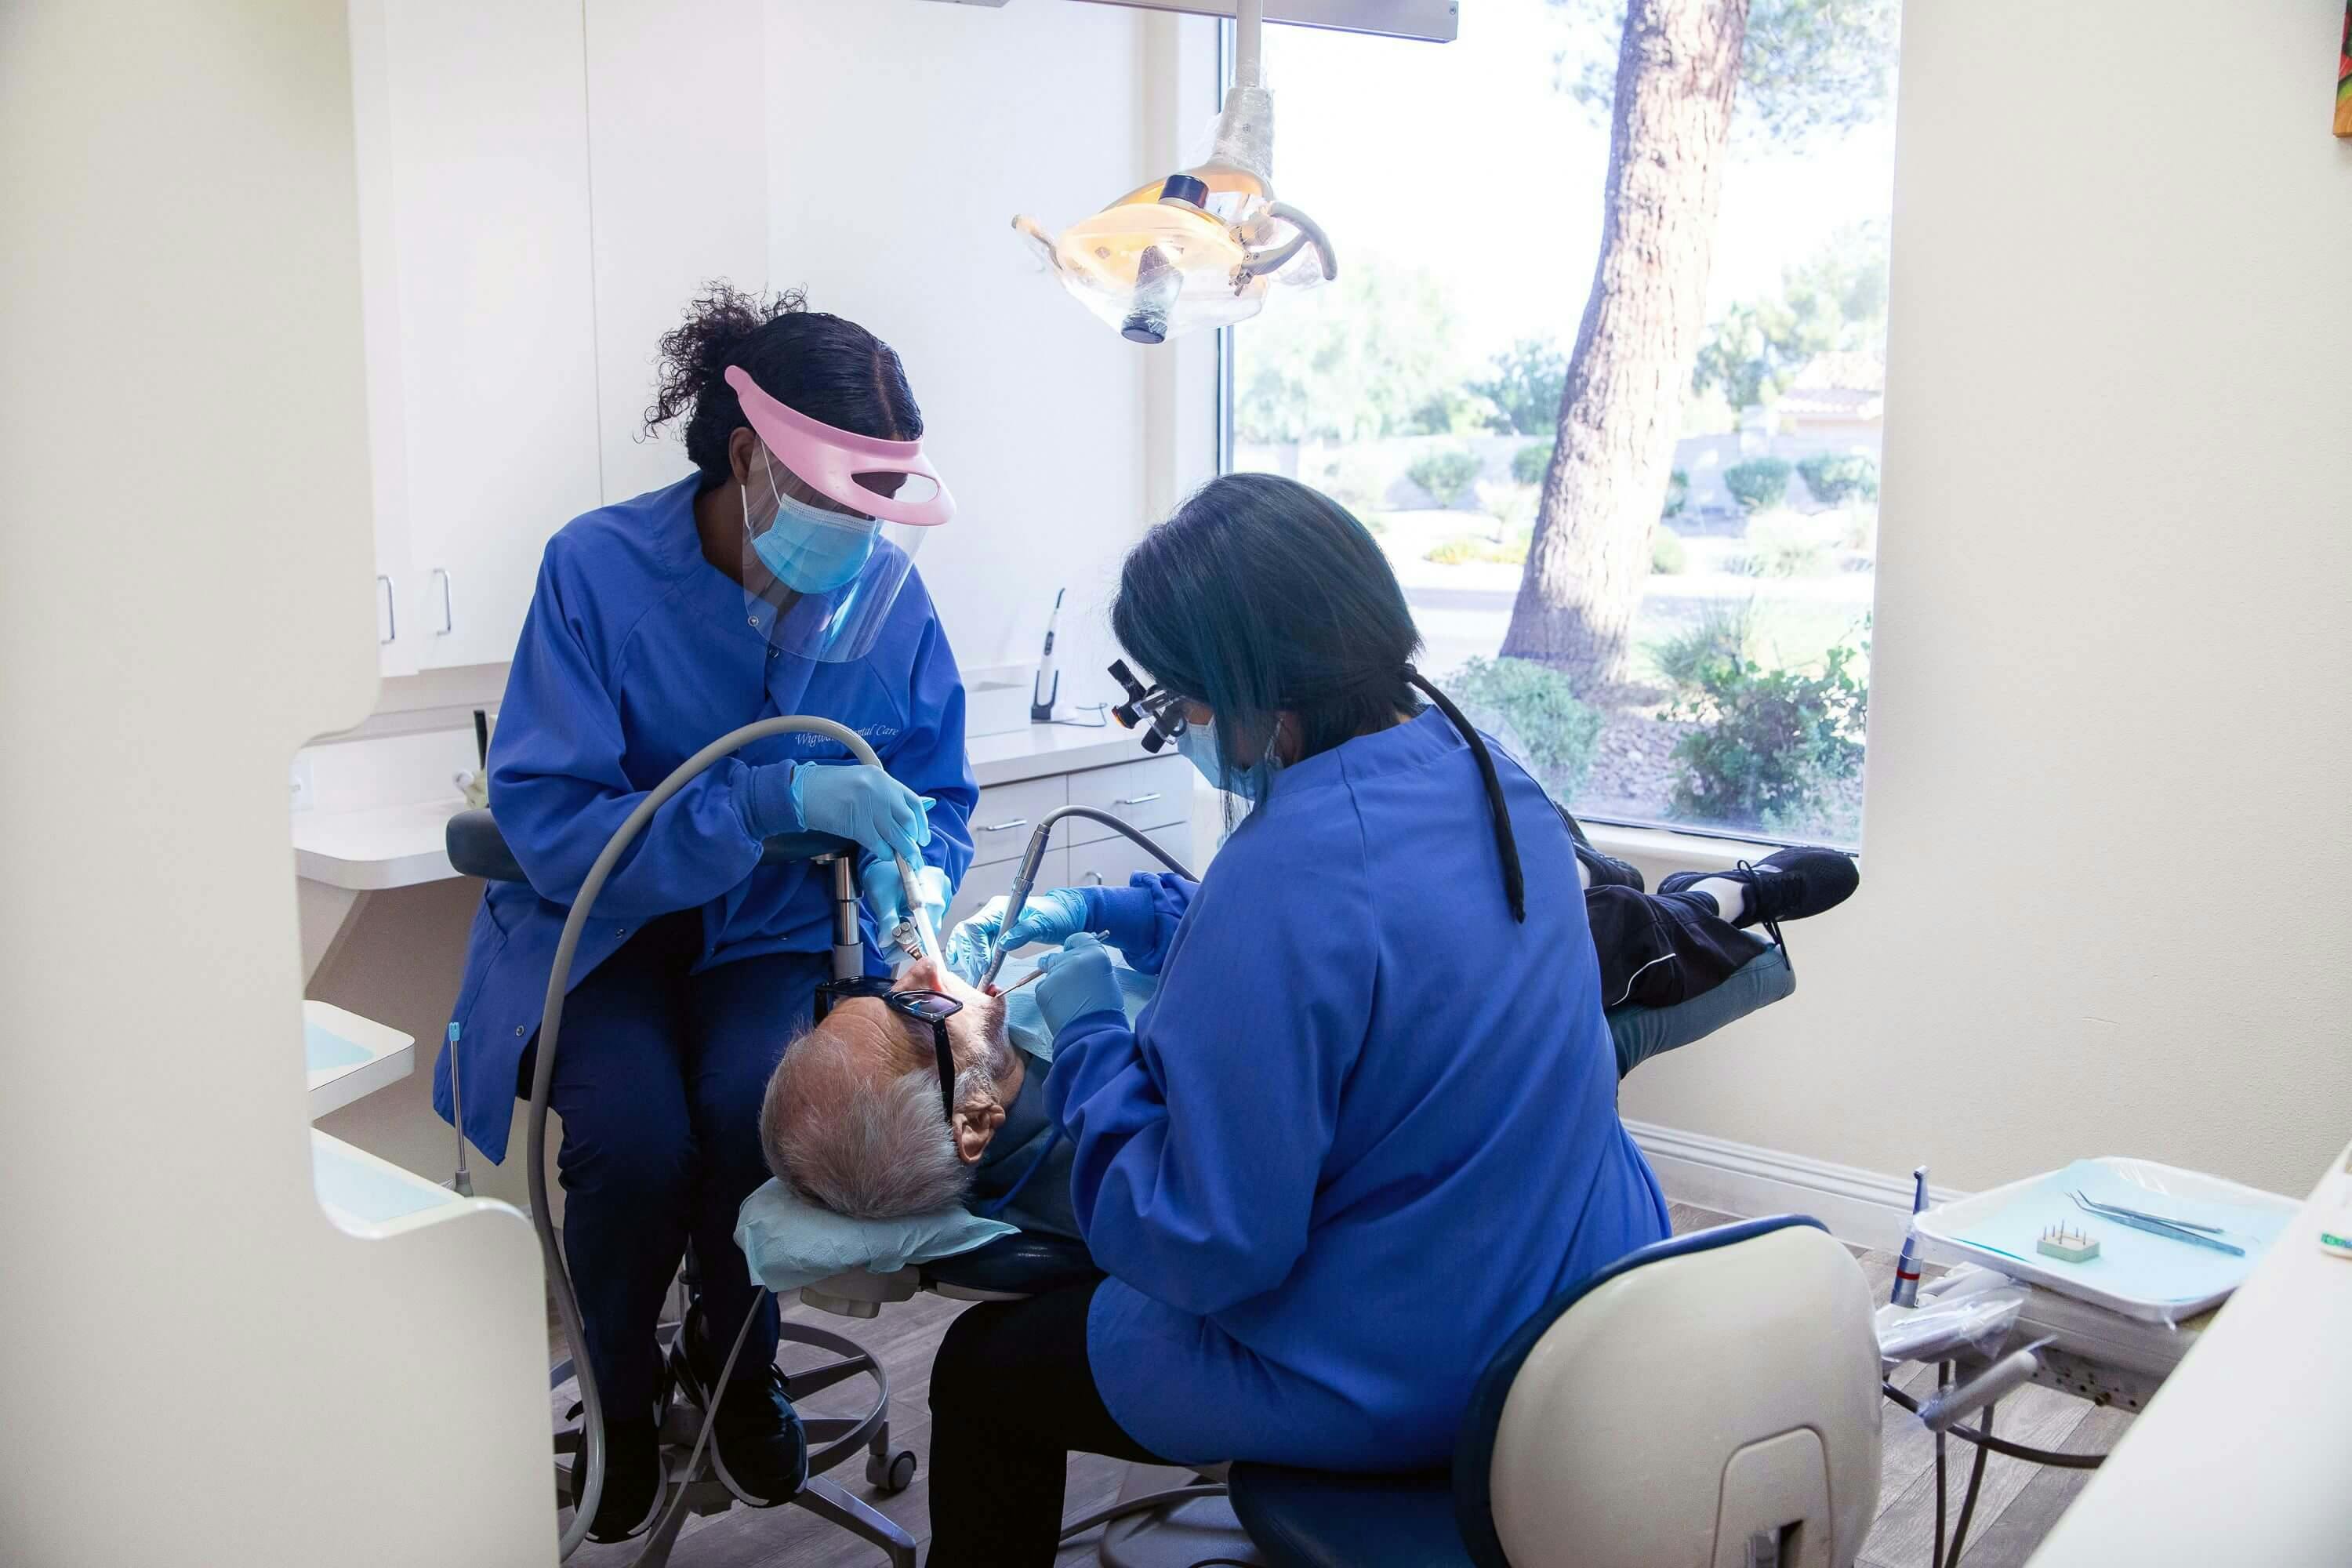 Two dental assistance in a process of a cleaning procedure for a patient